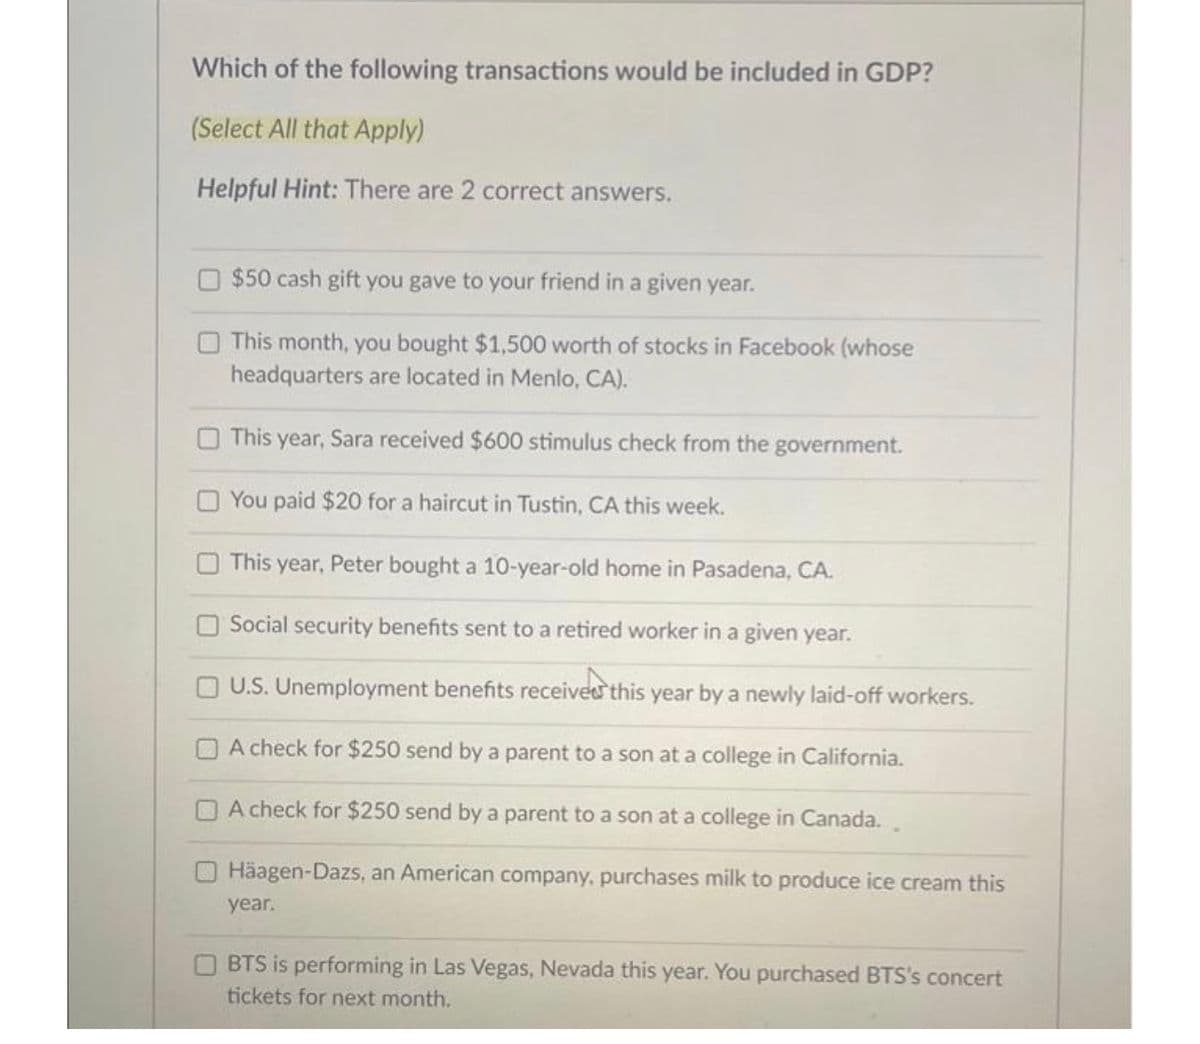 Which of the following transactions would be included in GDP?
(Select All that Apply)
Helpful Hint: There are 2 correct answers.
$50 cash gift you gave to your friend in a given year.
This month, you bought $1,500 worth of stocks in Facebook (whose
headquarters are located in Menlo, CA).
This year, Sara received $600 stimulus check from the government.
You paid $20 for a haircut in Tustin, CA this week.
This year, Peter bought a 10-year-old home in Pasadena, CA.
Social security benefits sent to a retired worker in a given year.
U.S. Unemployment benefits received this year by a newly laid-off workers.
verst
A check for $250 send by a parent to a son at a college in California.
A check for $250 send by a parent to a son at a college in Canada..
Häagen-Dazs, an American company, purchases milk to produce ice cream this
year.
BTS is performing in Las Vegas, Nevada this year. You purchased BTS's concert
tickets for next month.